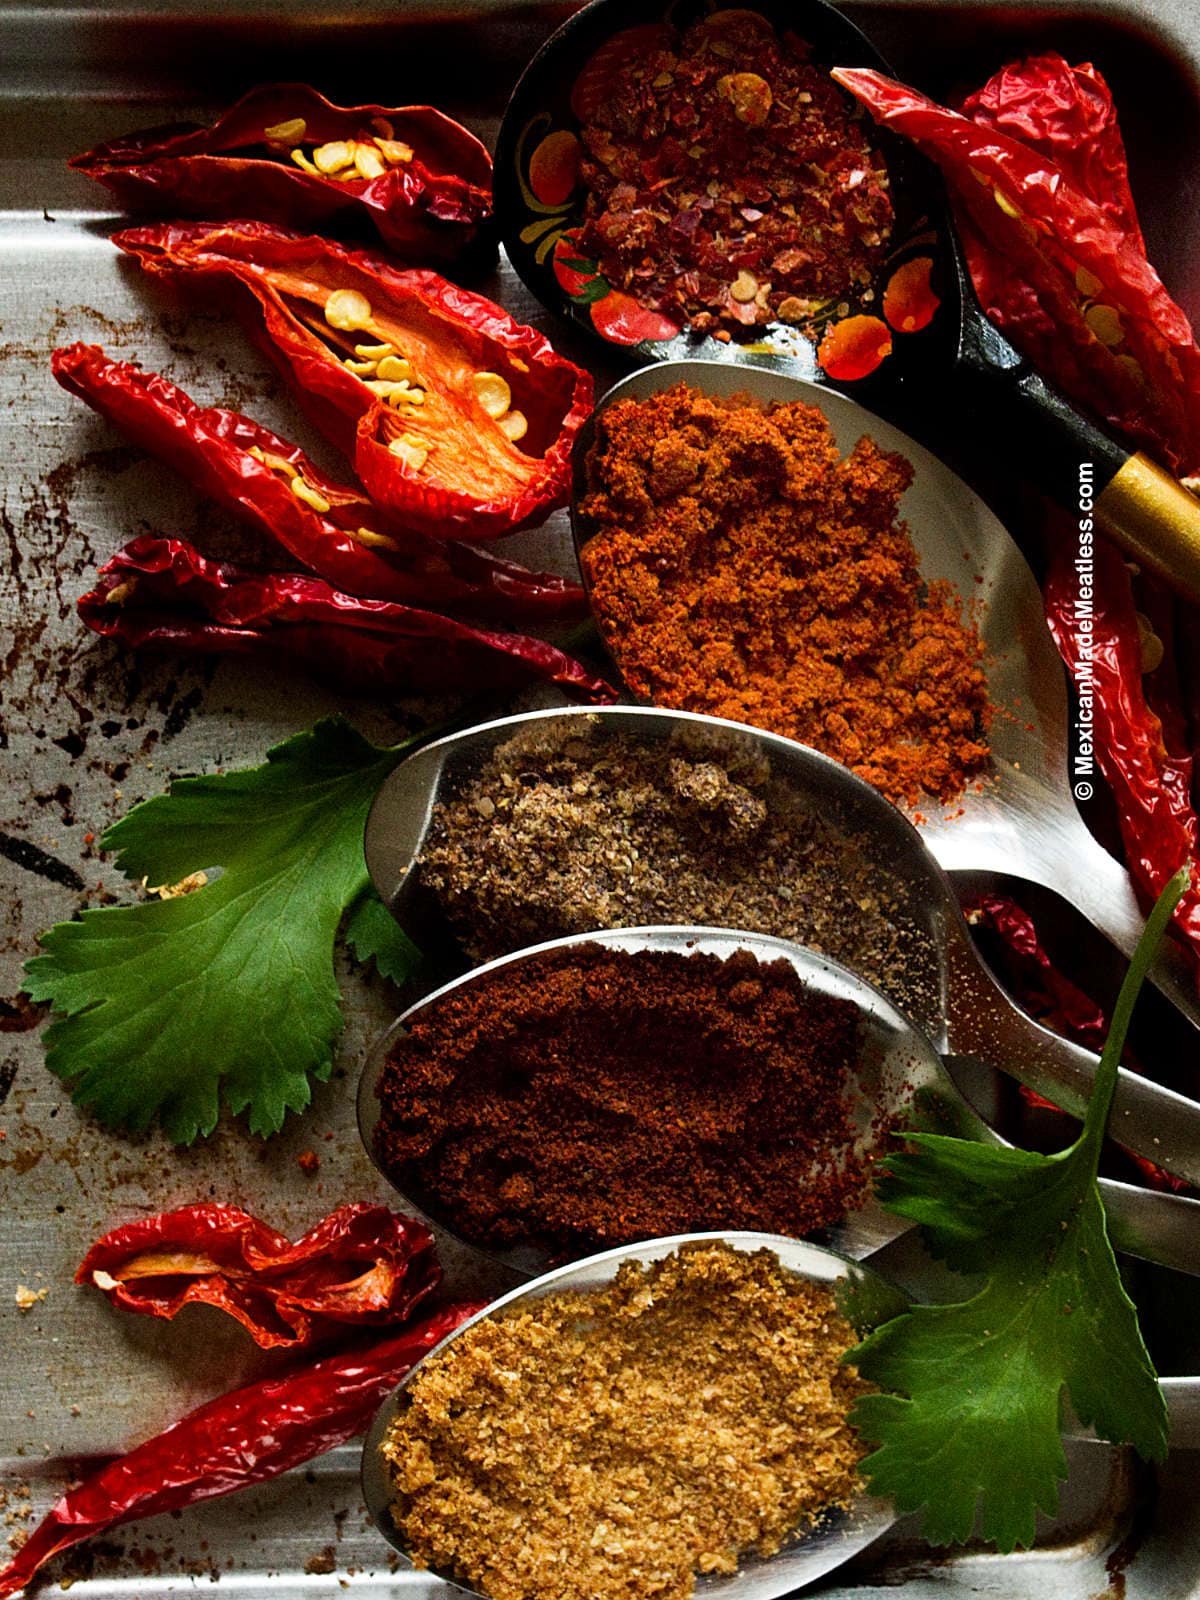 The Surprising Health Benefits of Eating Spicy Food